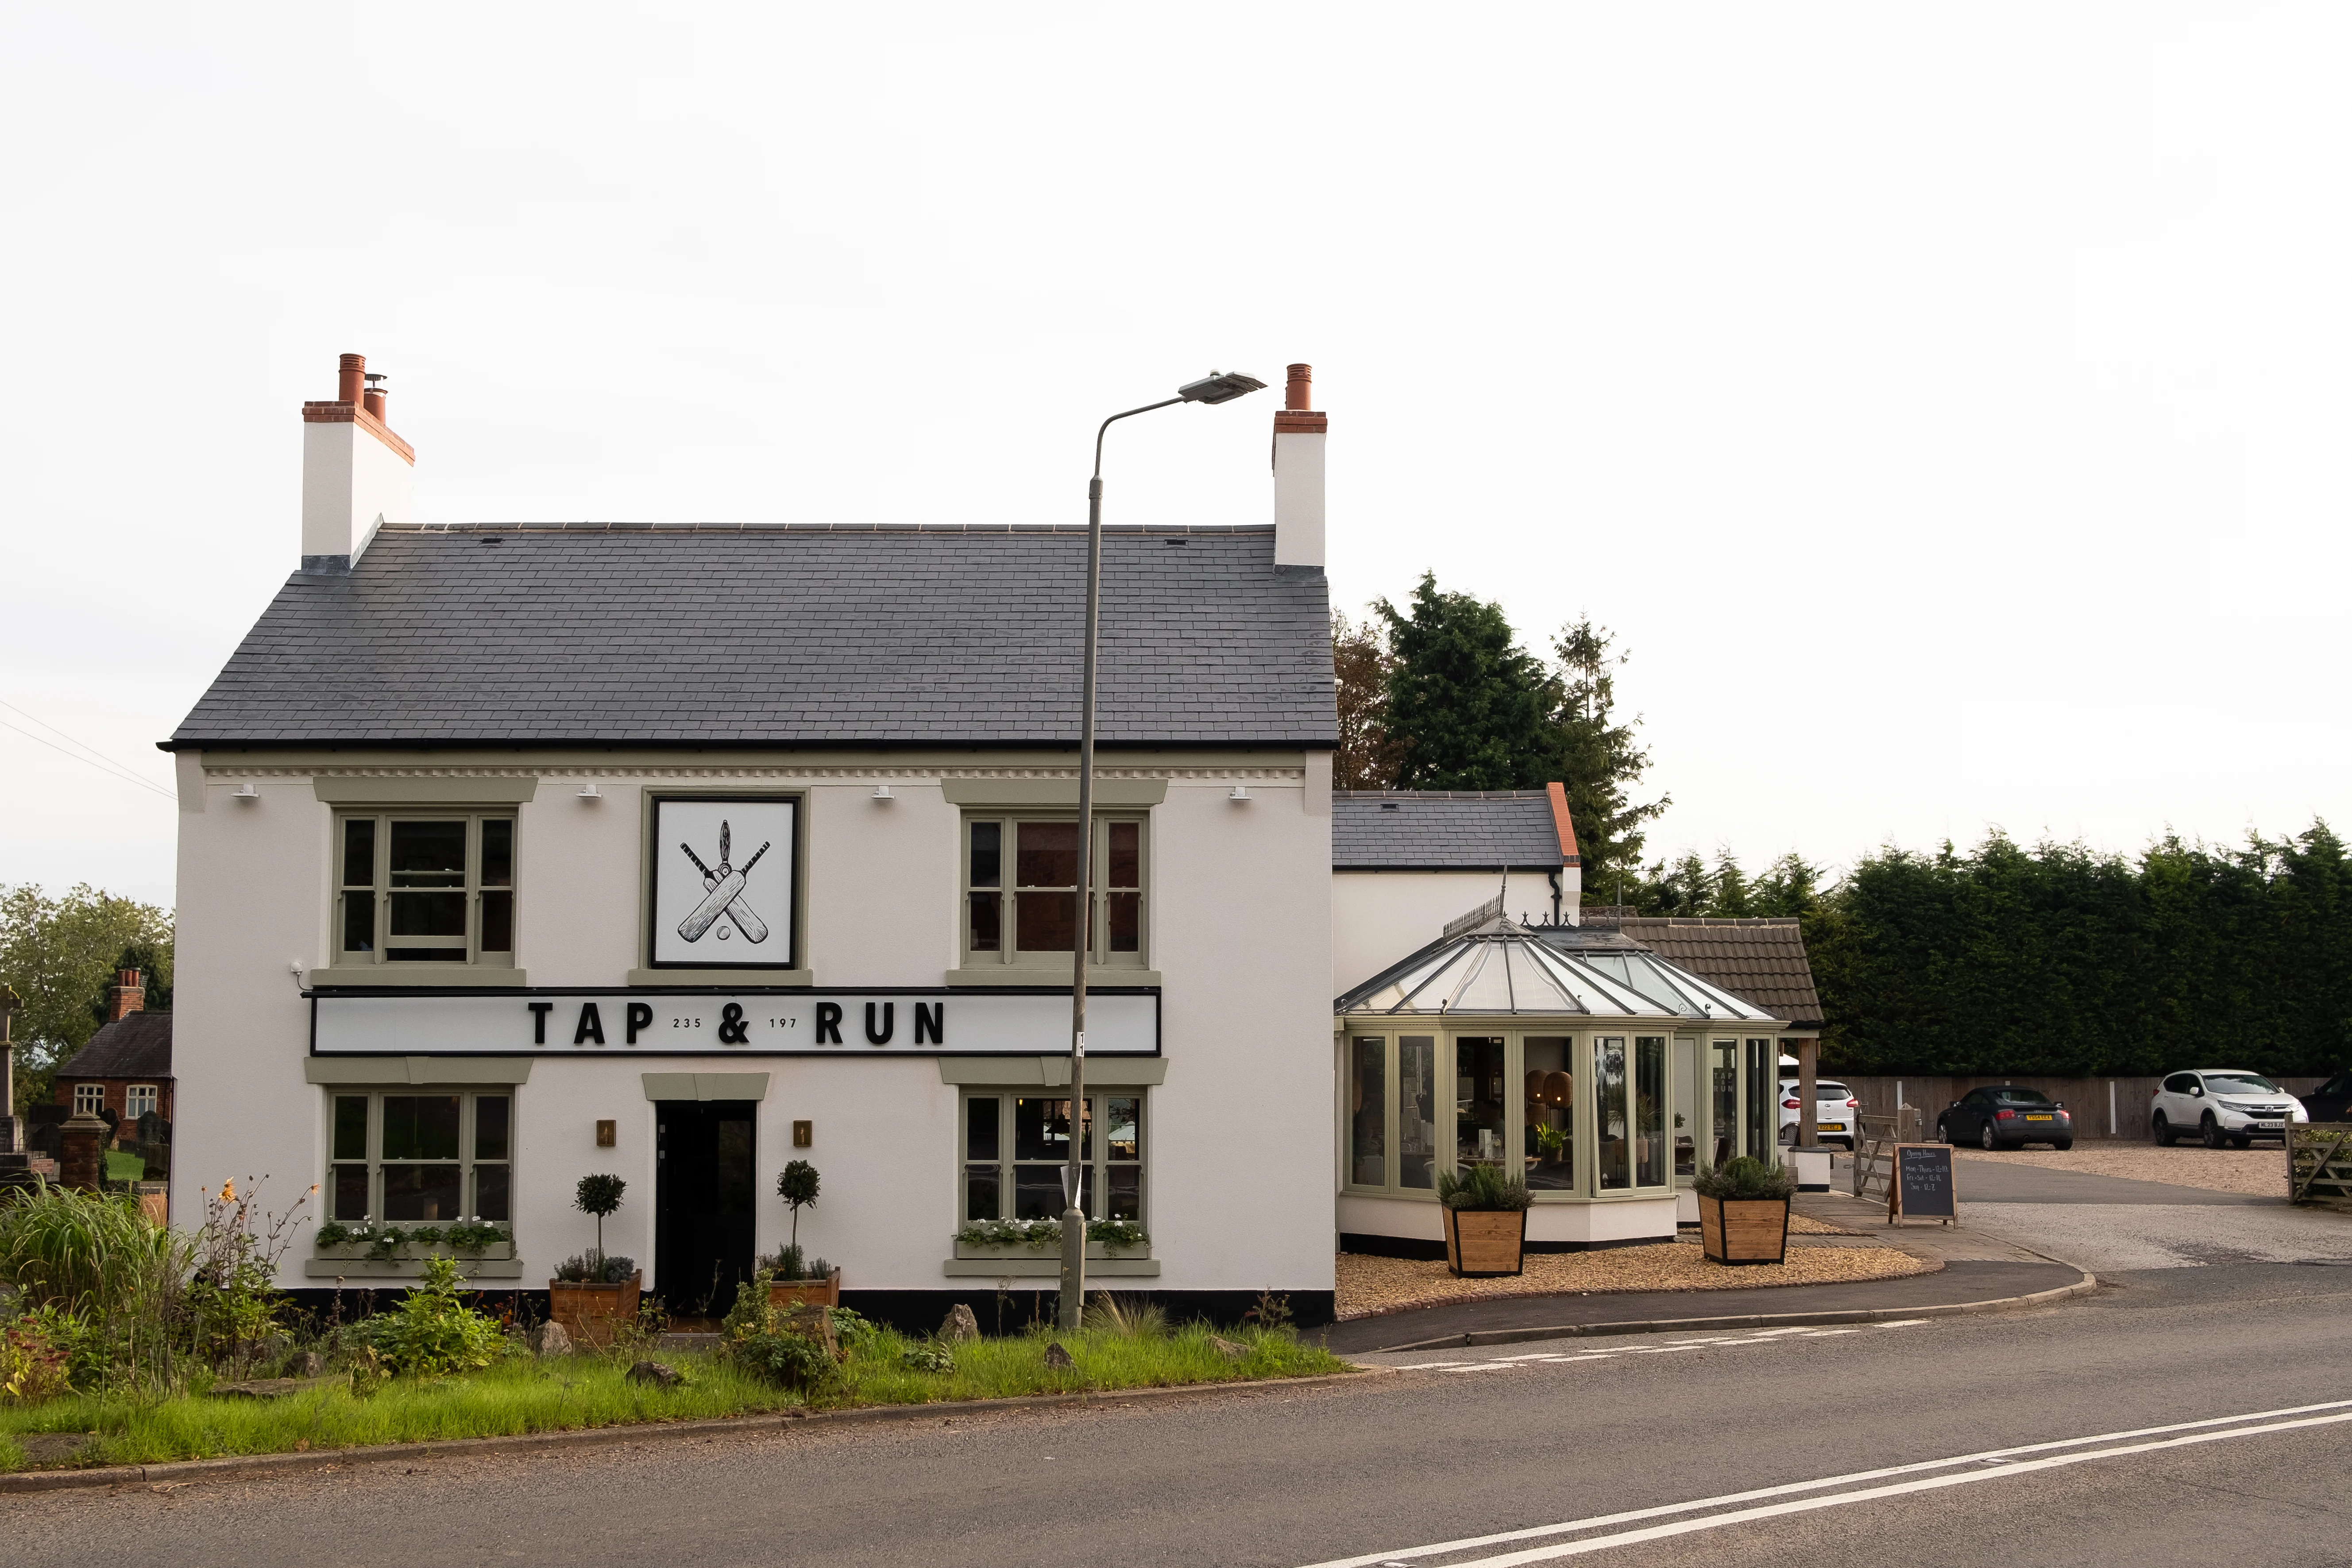 Tap and run pub following renovation after fire